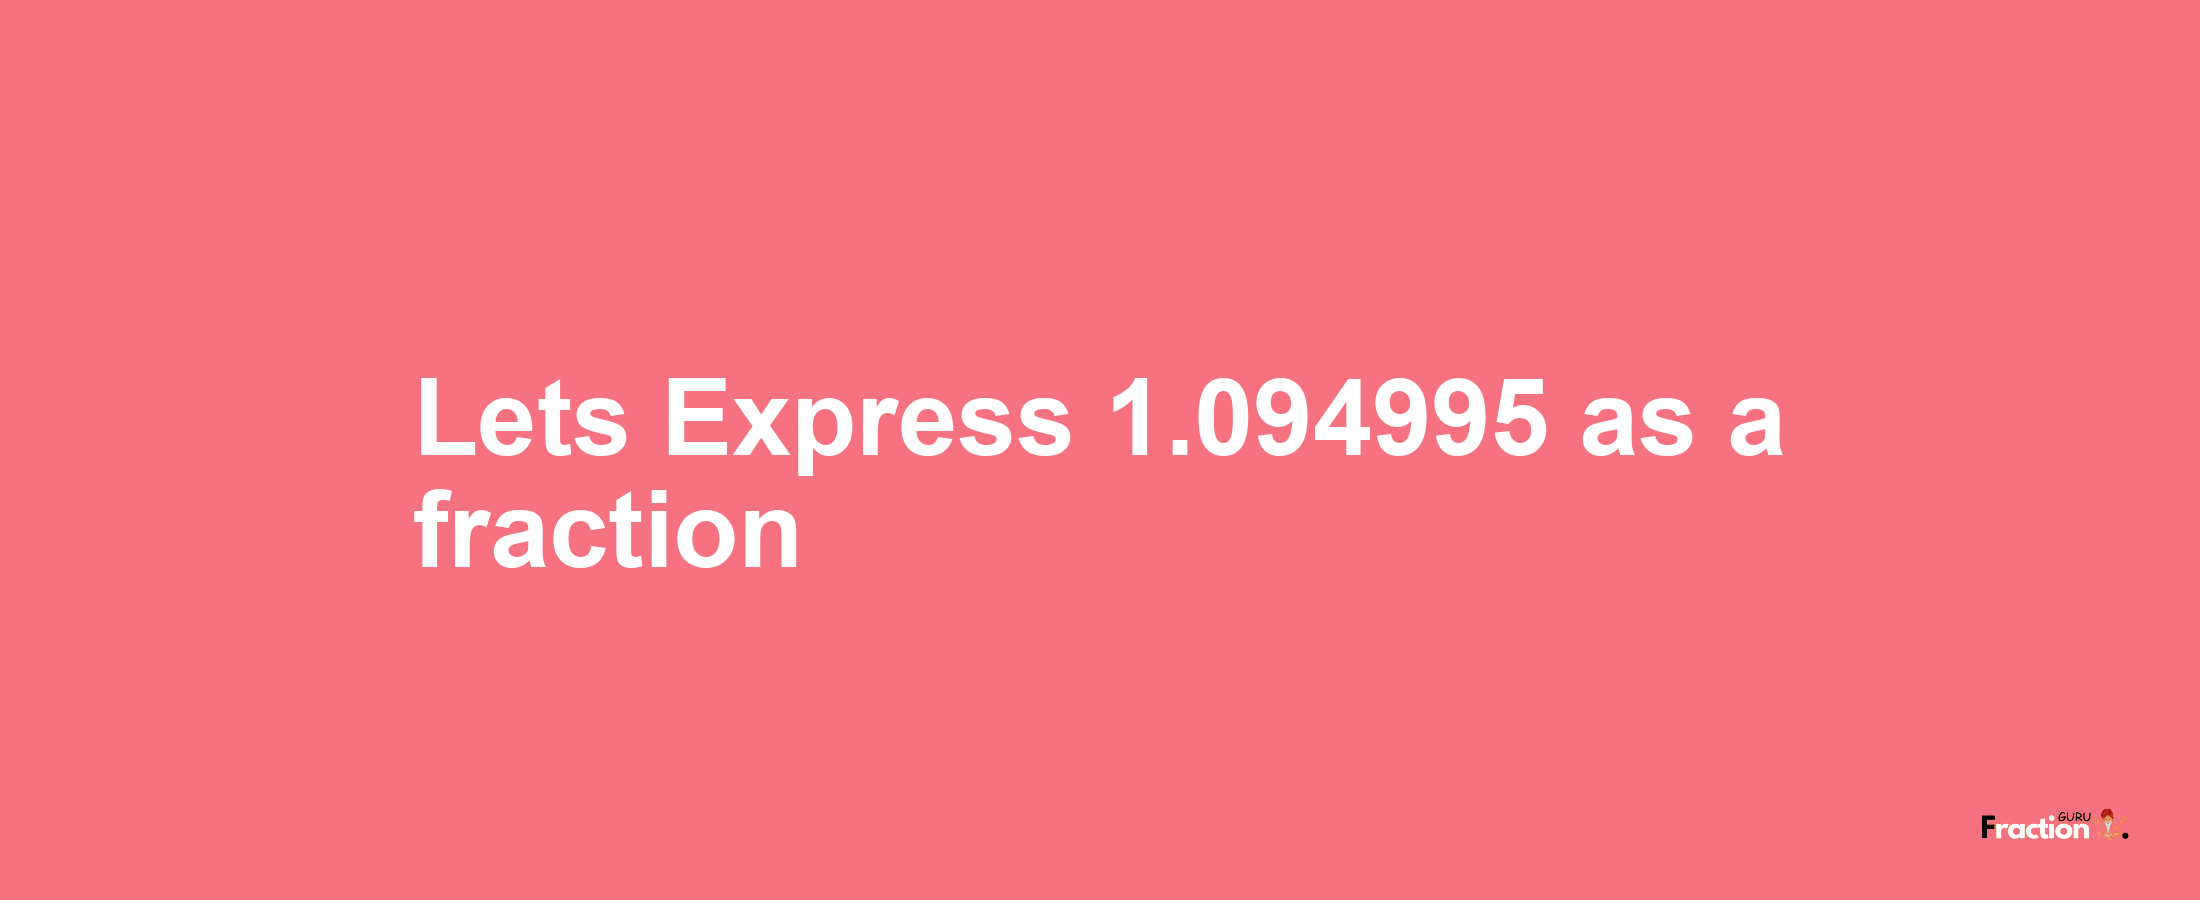 Lets Express 1.094995 as afraction